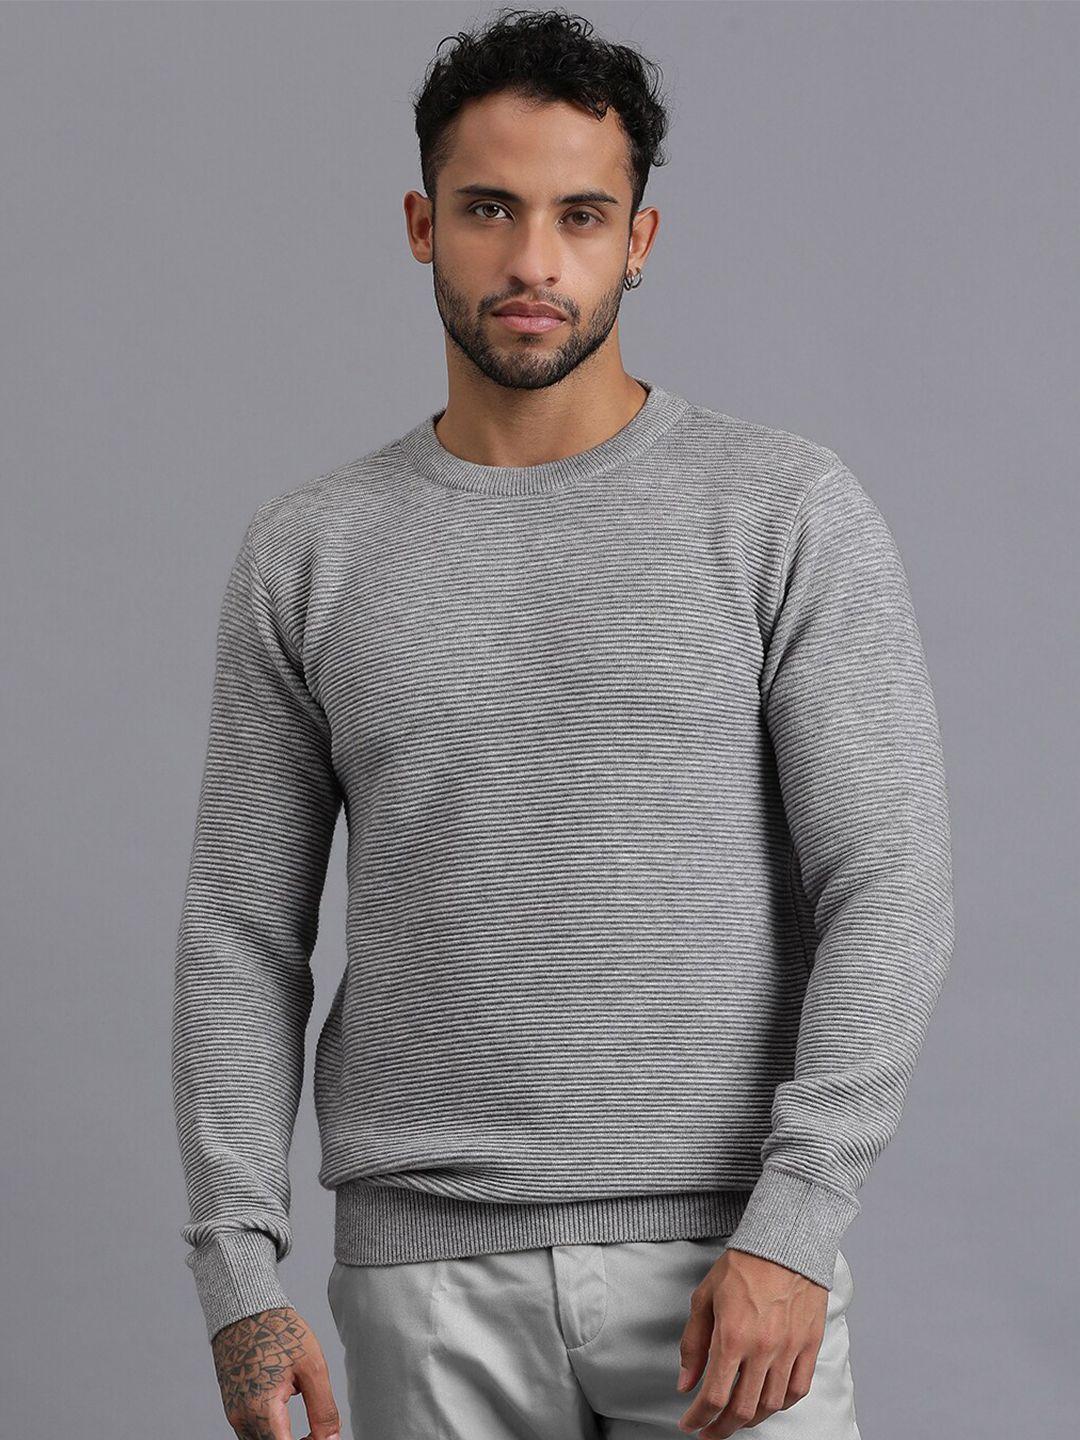 javinishka-cable-knitted-round-neck-woollen-pullover-sweater